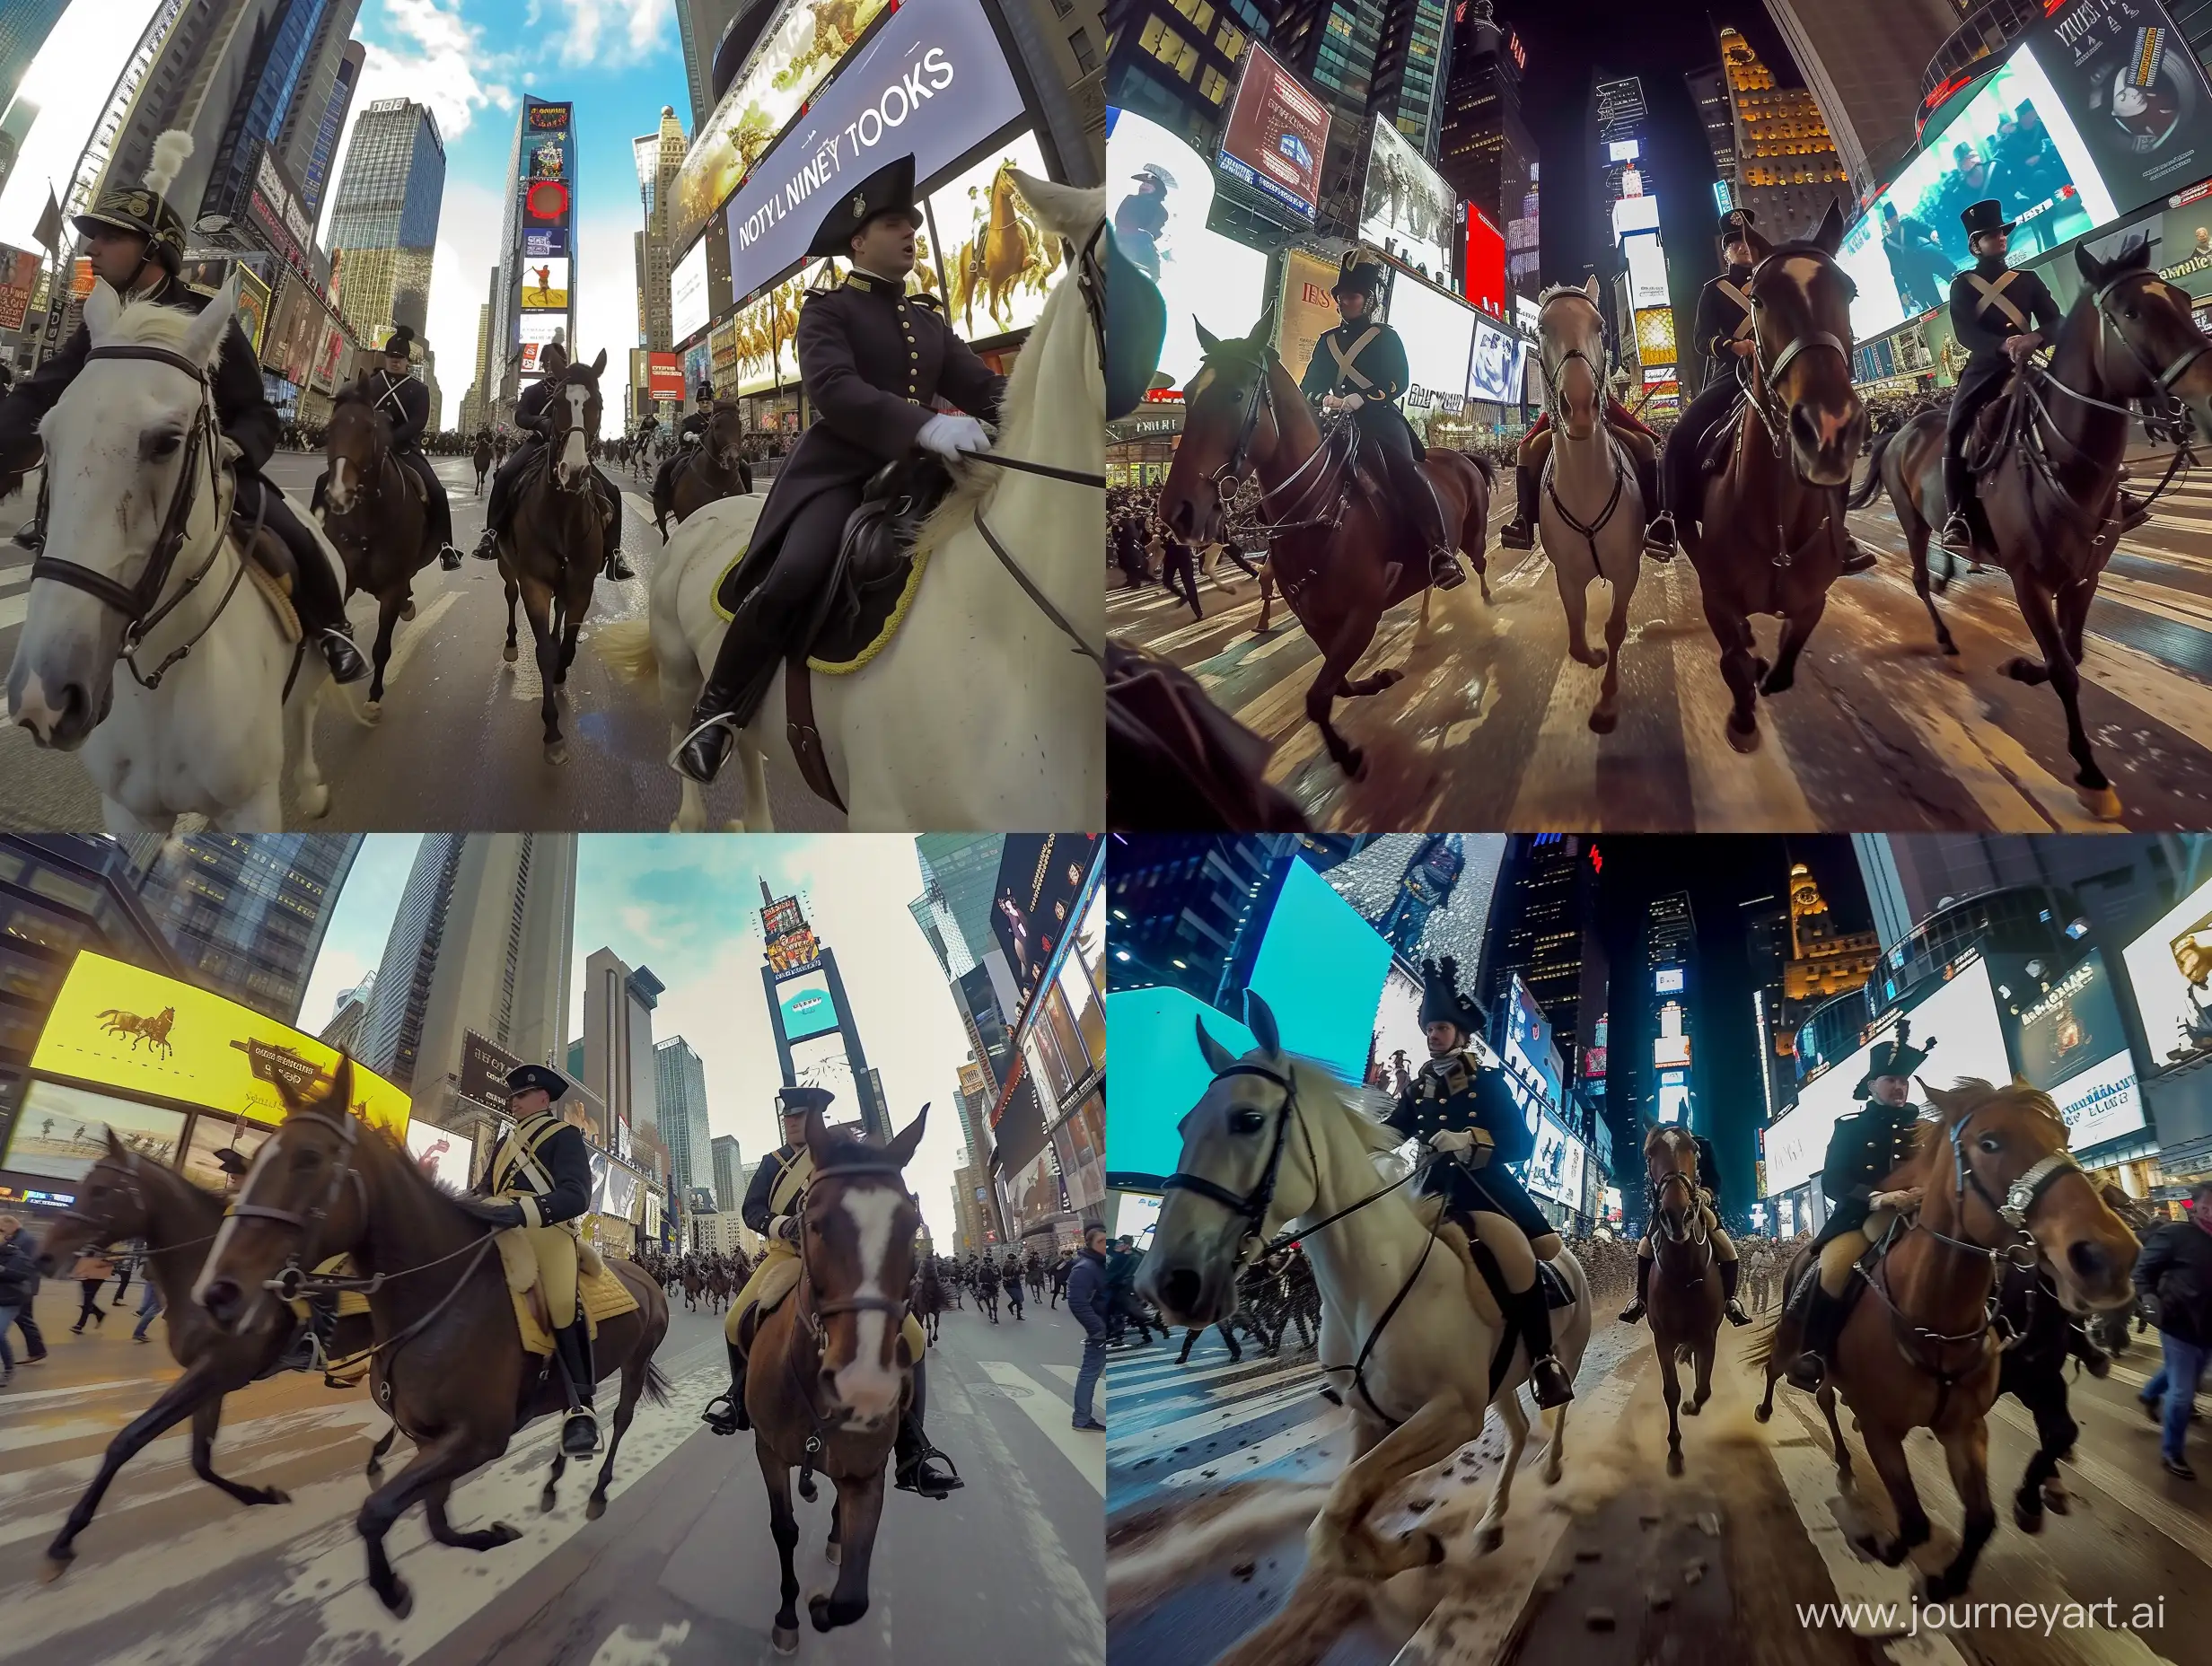 Napoleonic-Cavalry-Charges-Through-Times-Square-in-GoPro-POV